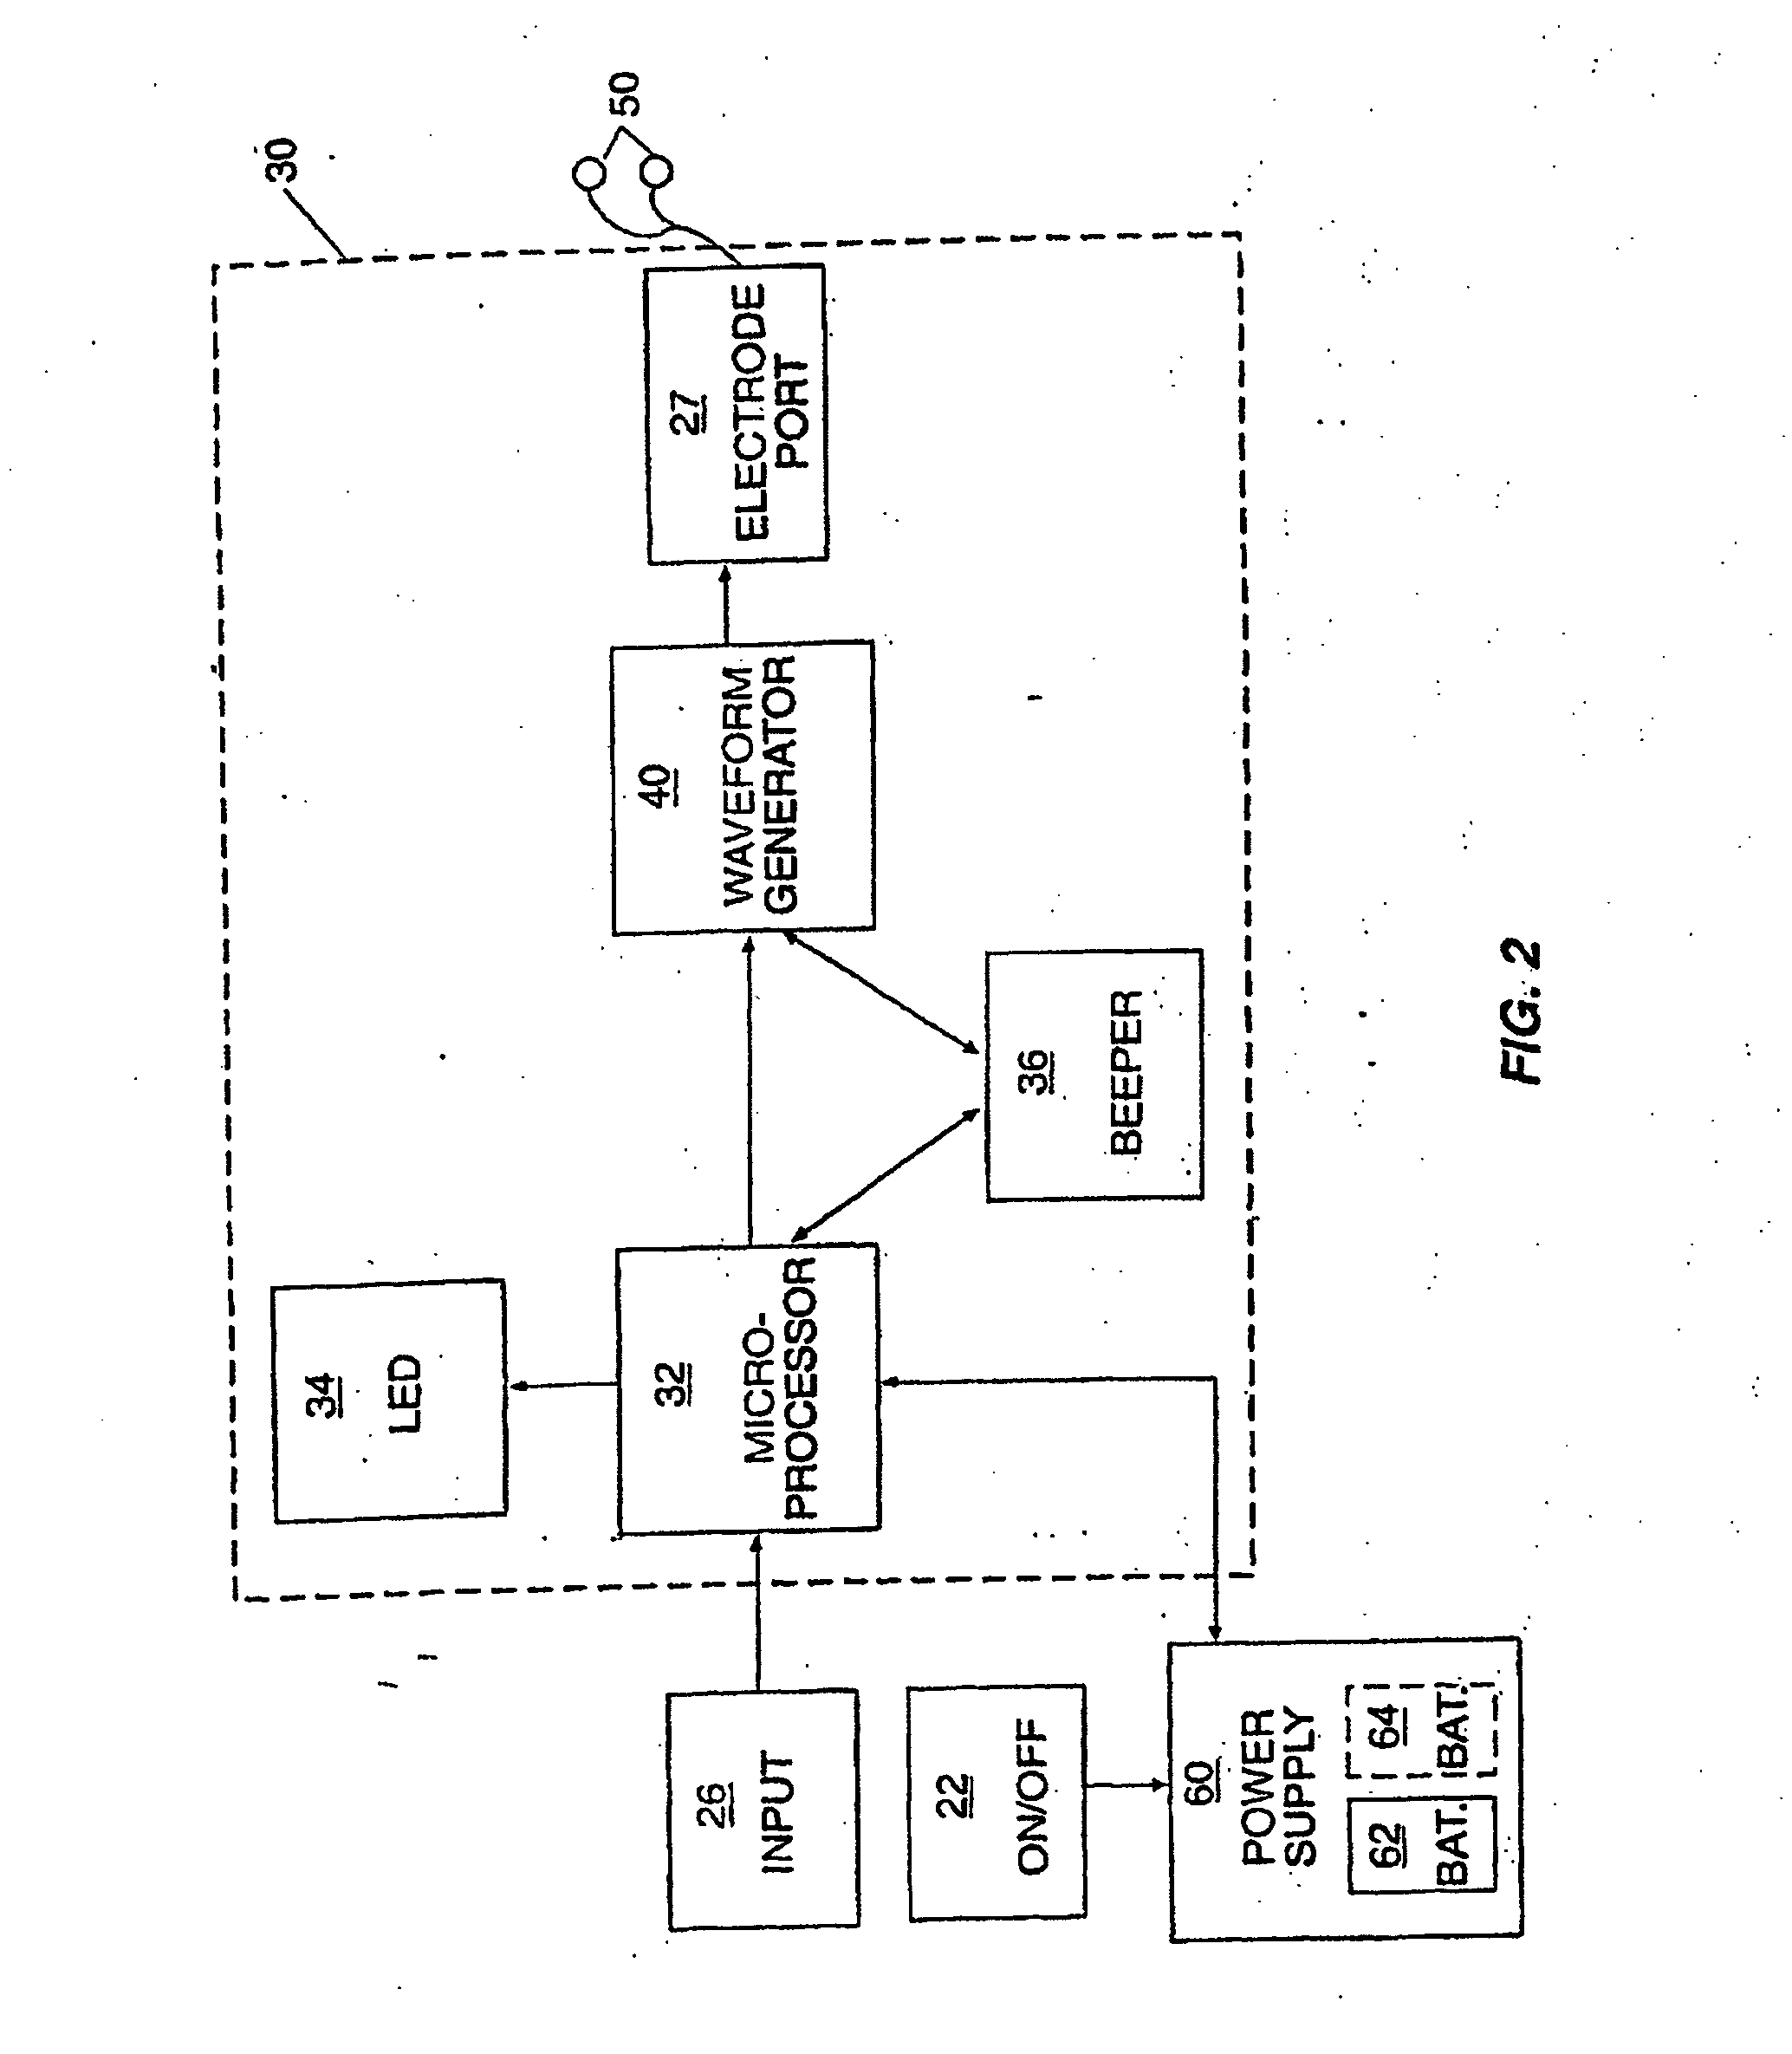 Method and apparatus for treating a wound